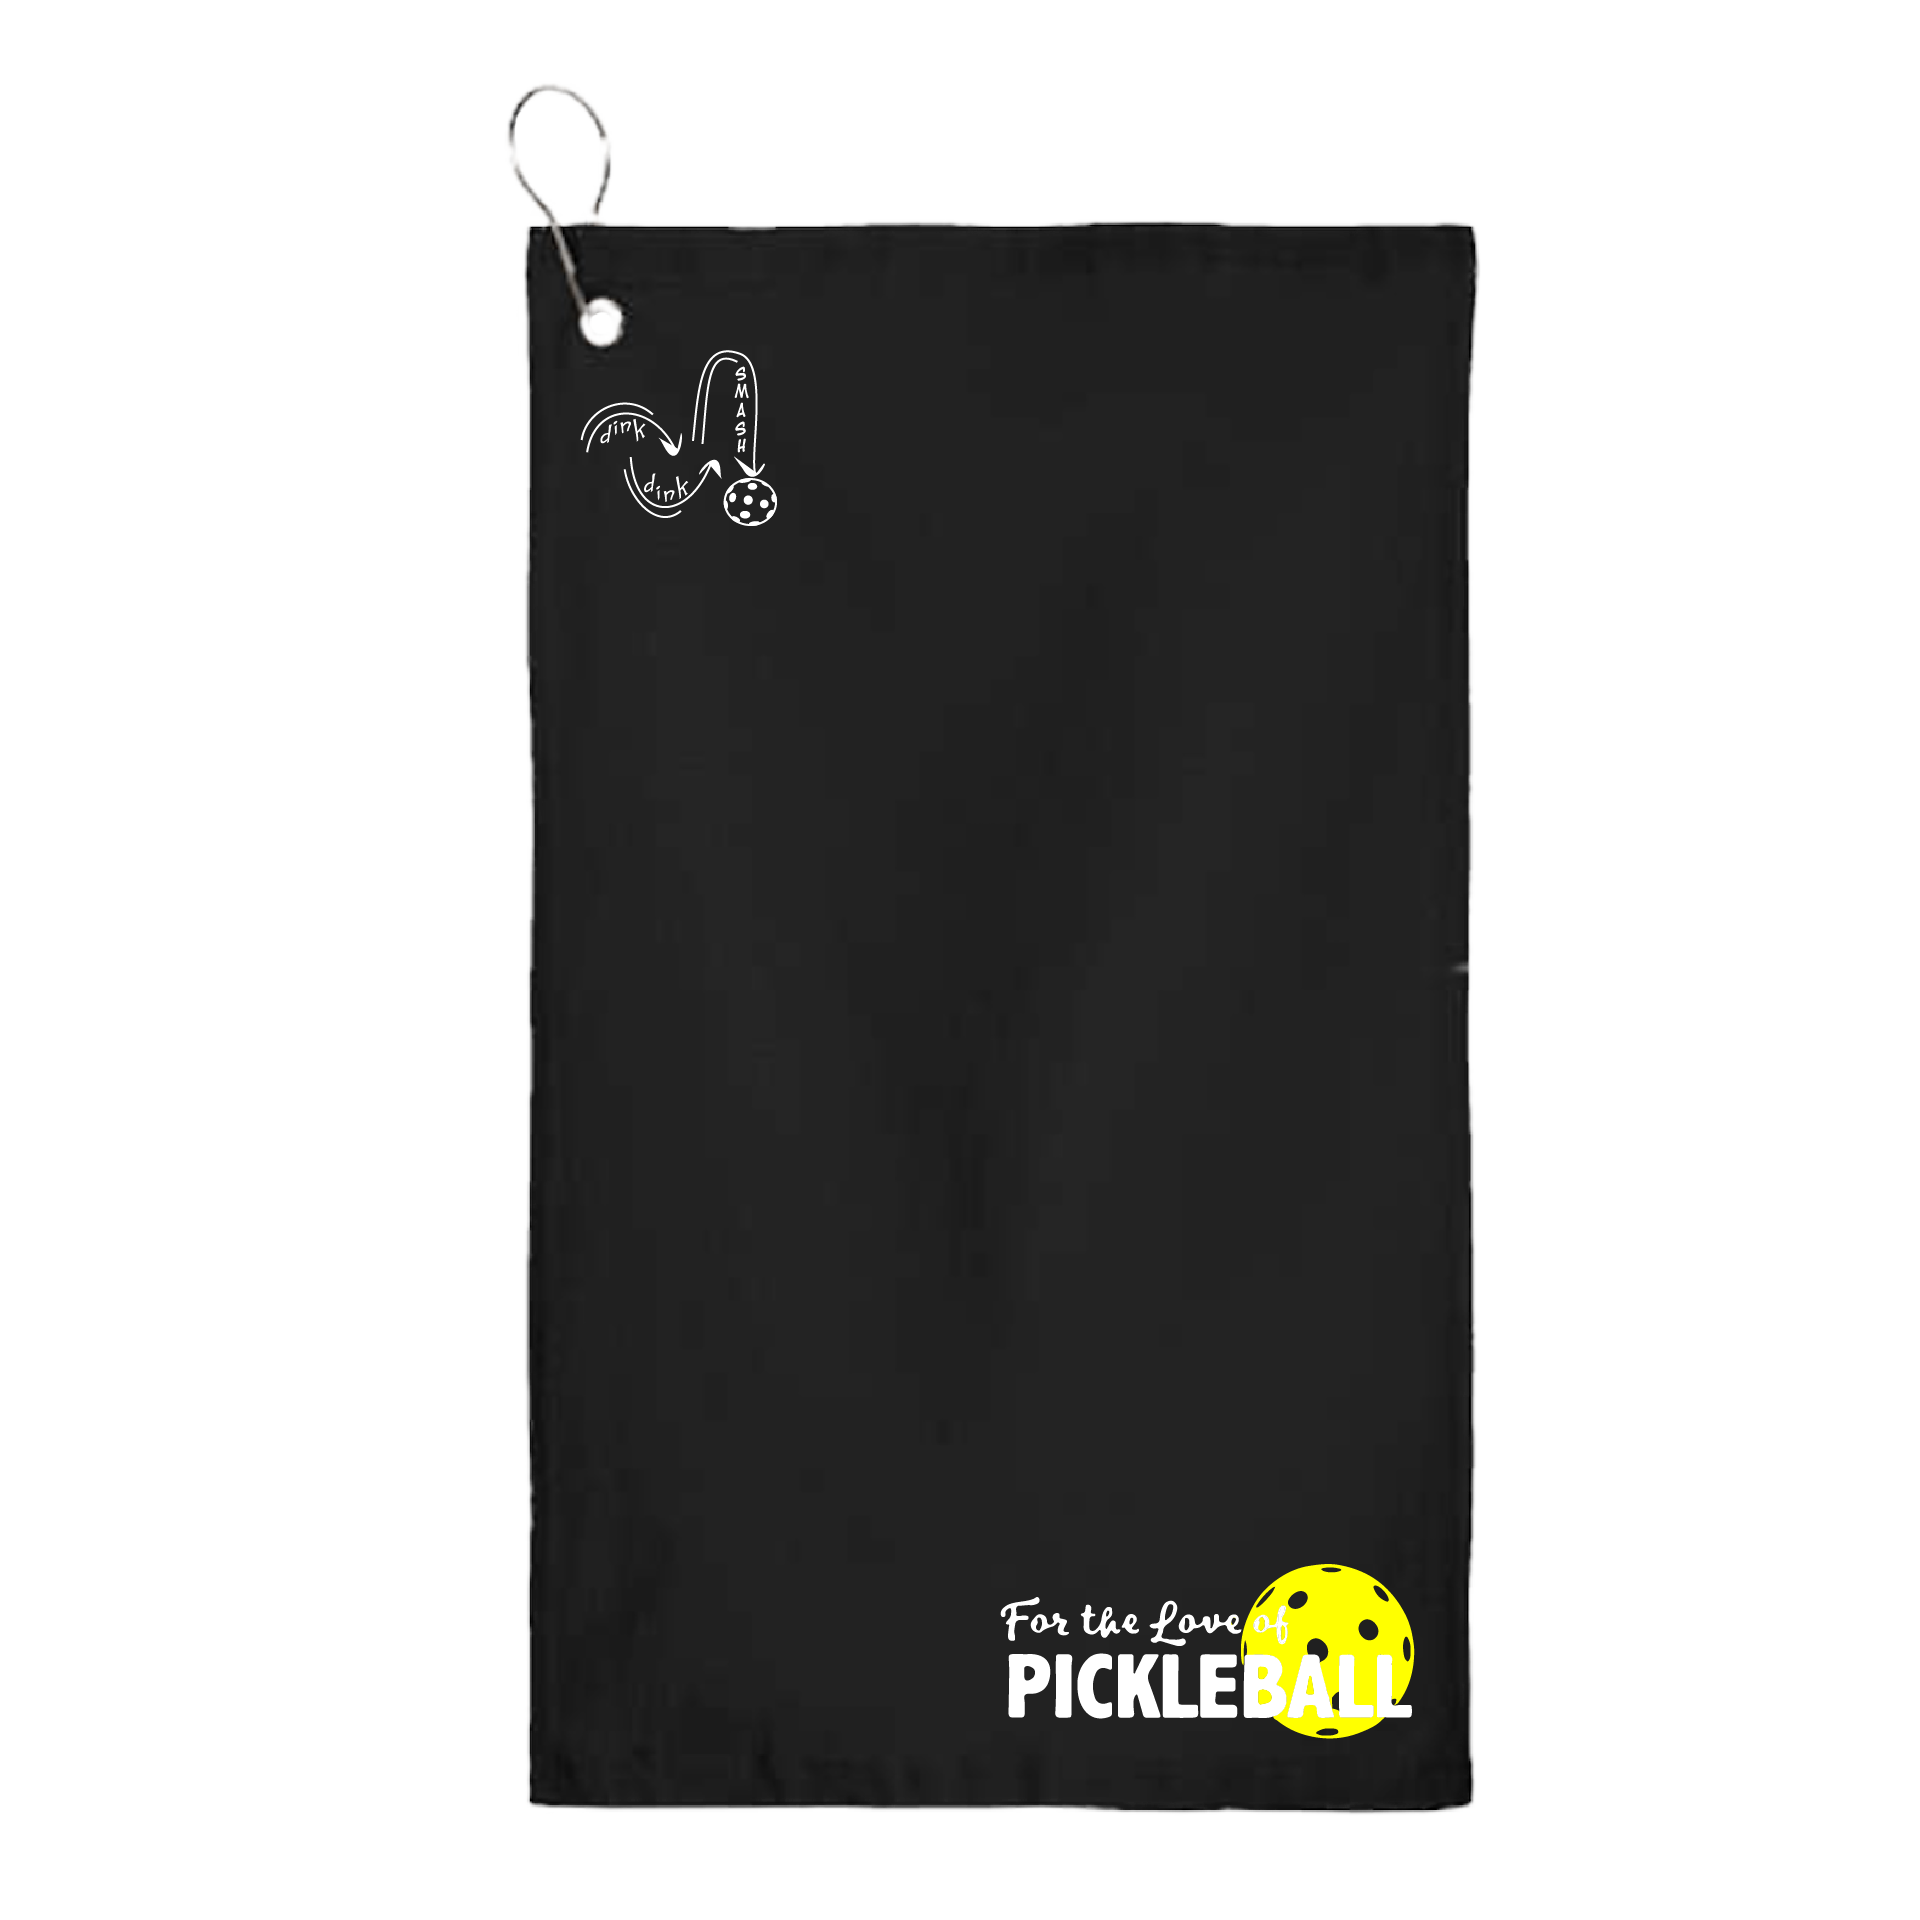 This For the Love of Pickleball towel is crafted with cotton terry velour for optimal performance. It features grommets, hooks, and hemmed edges for added durability. It's perfect for completing your pickleball gear, and an ideal gift for friends and tournaments. The towel is designed to be both absorbent and lightweight, so you can remain dry and comfortable while you play. 